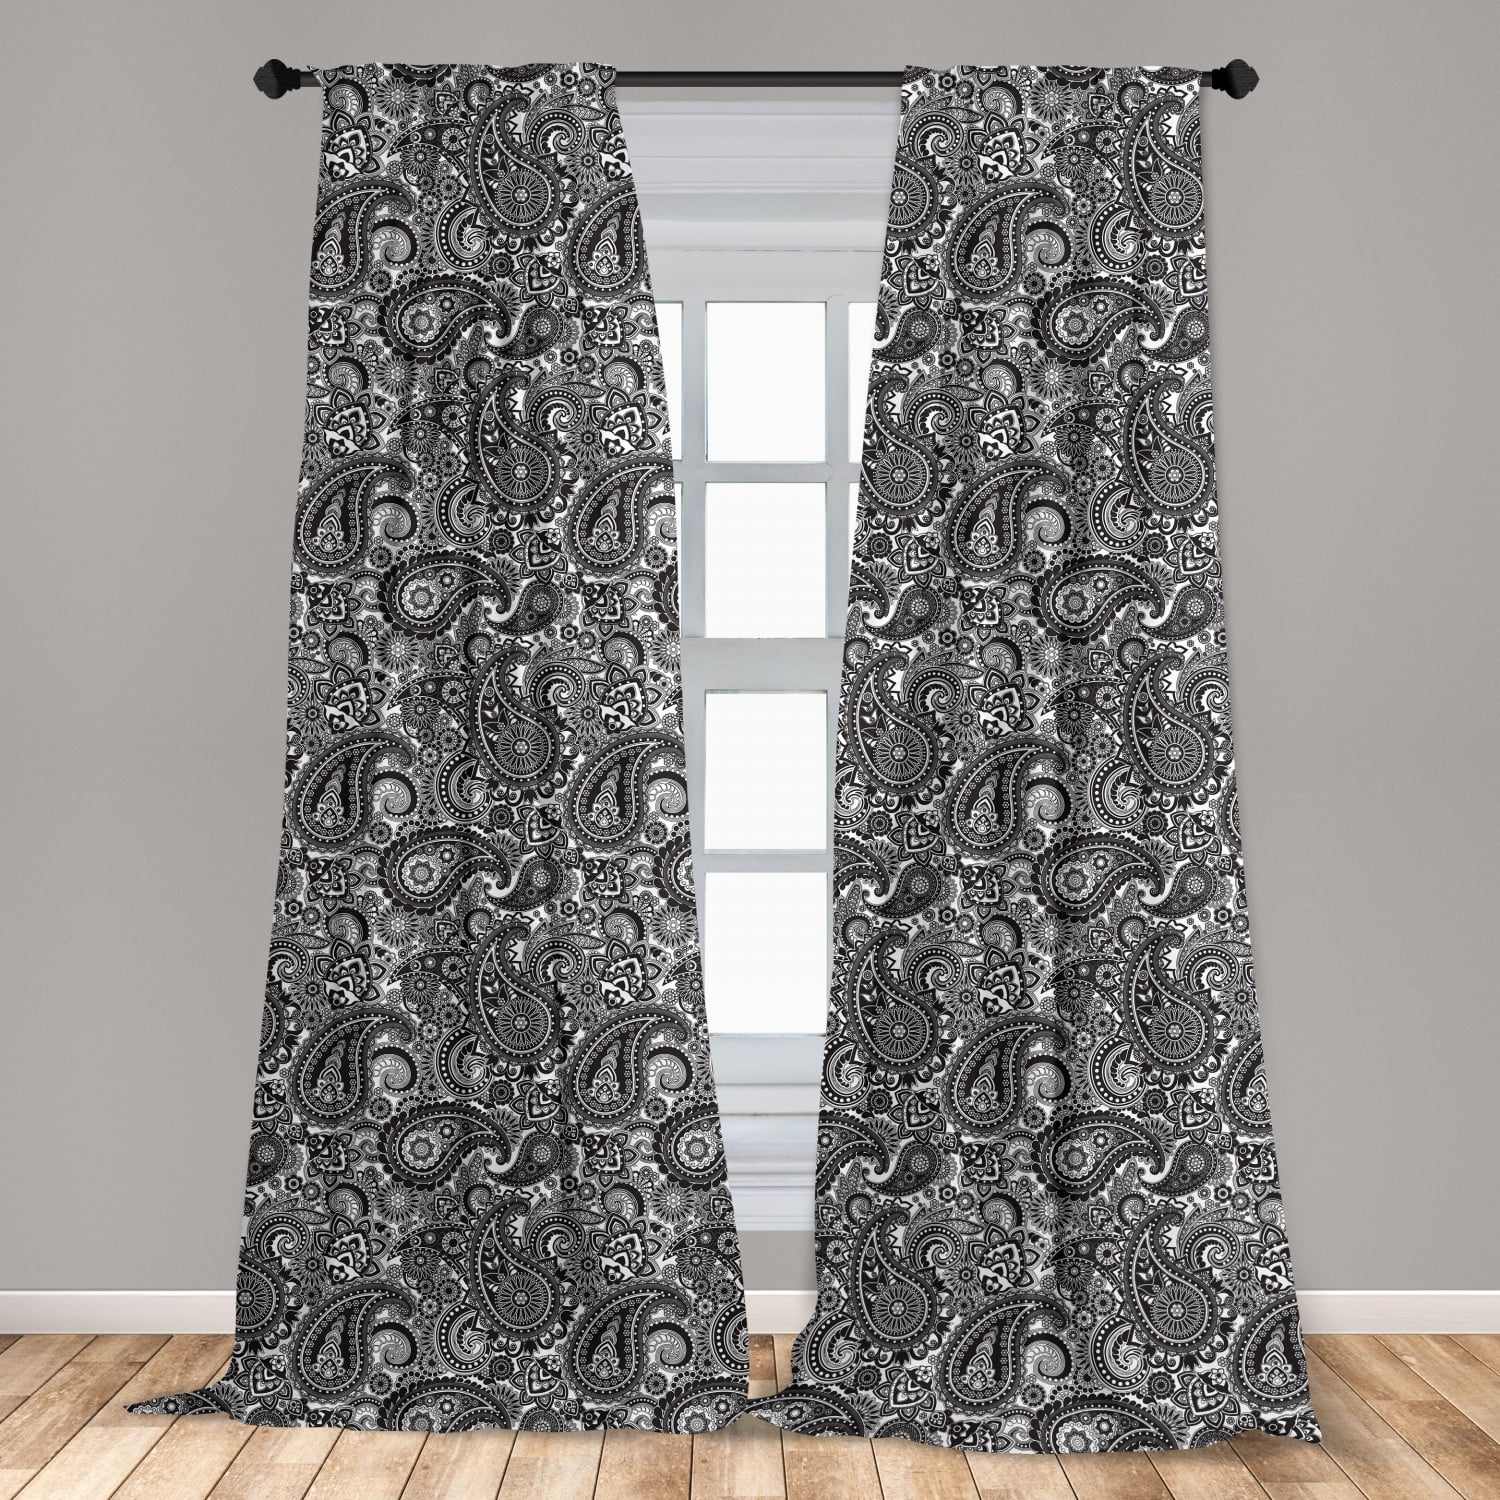 Black and White Curtains Fishing Boat Window Drapes 2 Panel Set 108x84 Inches 